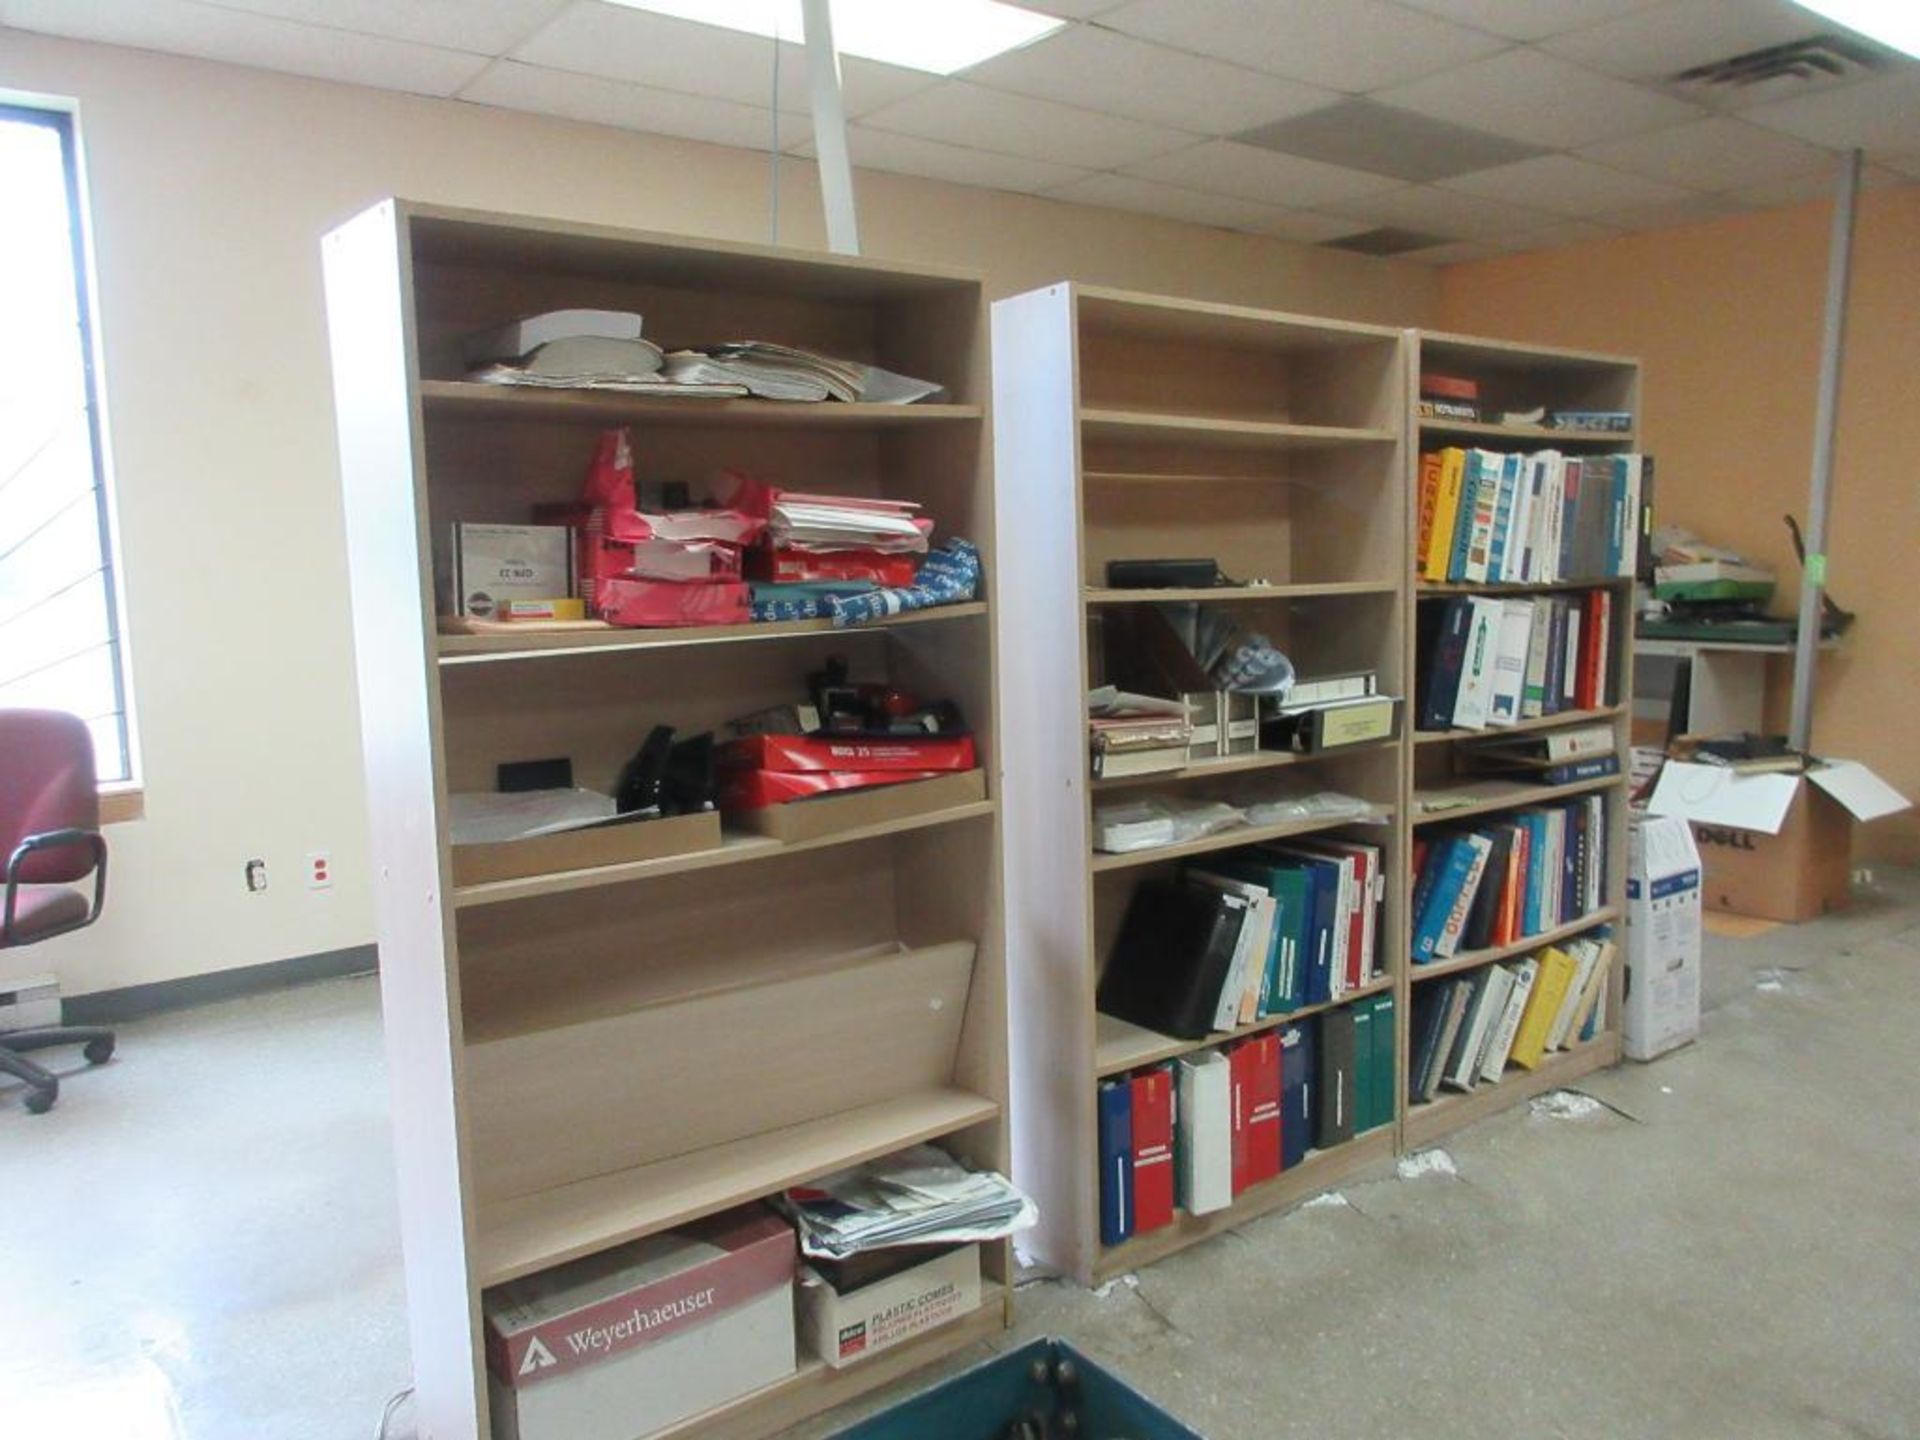 CONTENTS OF WORK AREA INCL 5 FILE CABINETS, 1 BLUEPRINT CABINET, 8 CHAIRS, 1 STAINLESS TABLE, 3 BOOK - Image 14 of 16